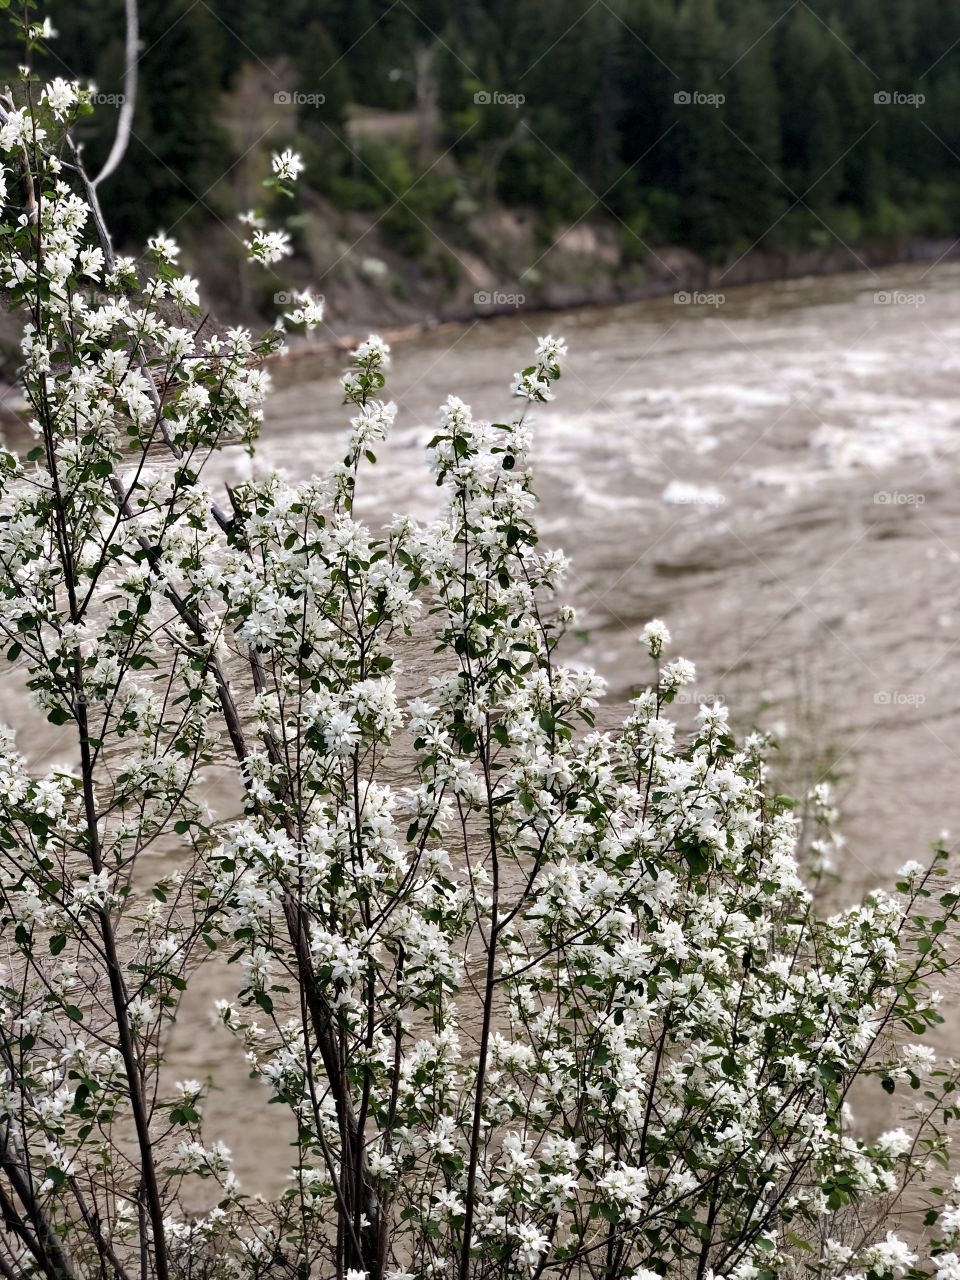 Flowers in front of a raging river 